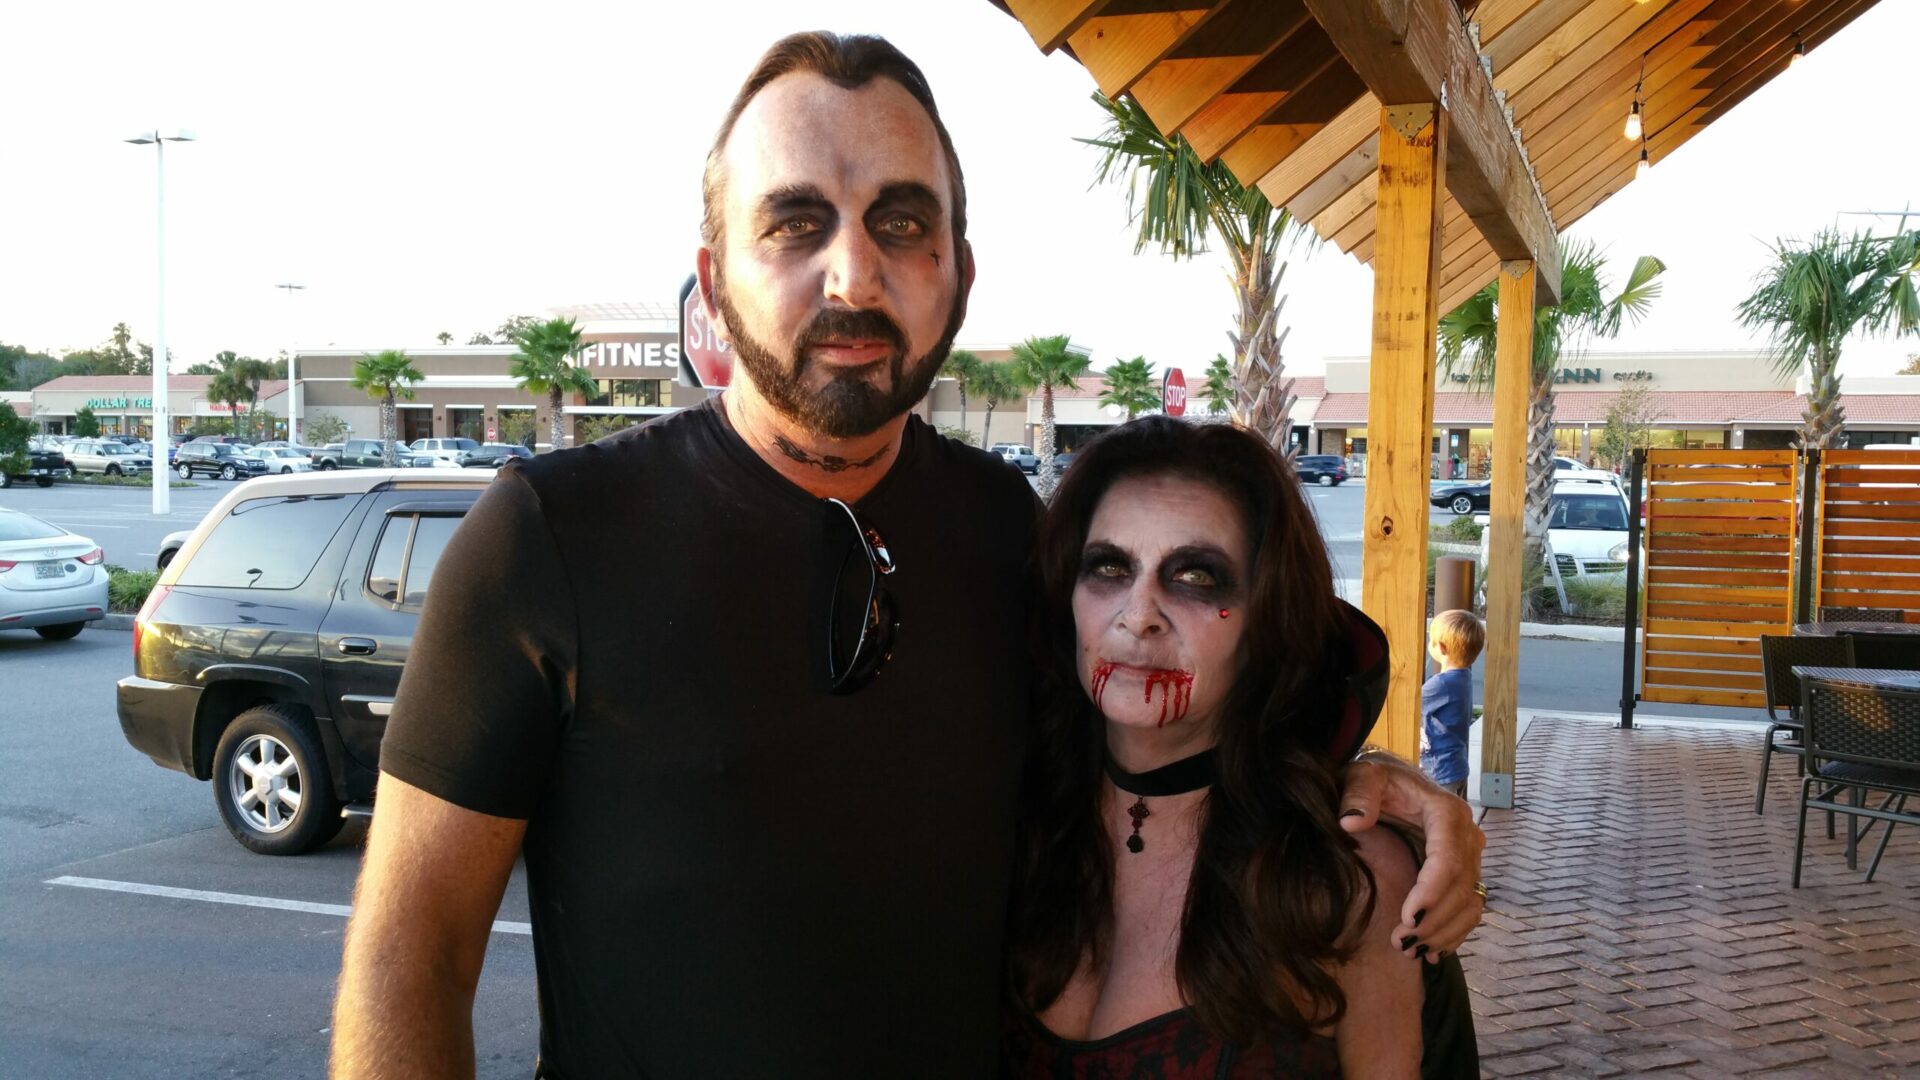 A man and woman dressed up as zombies.